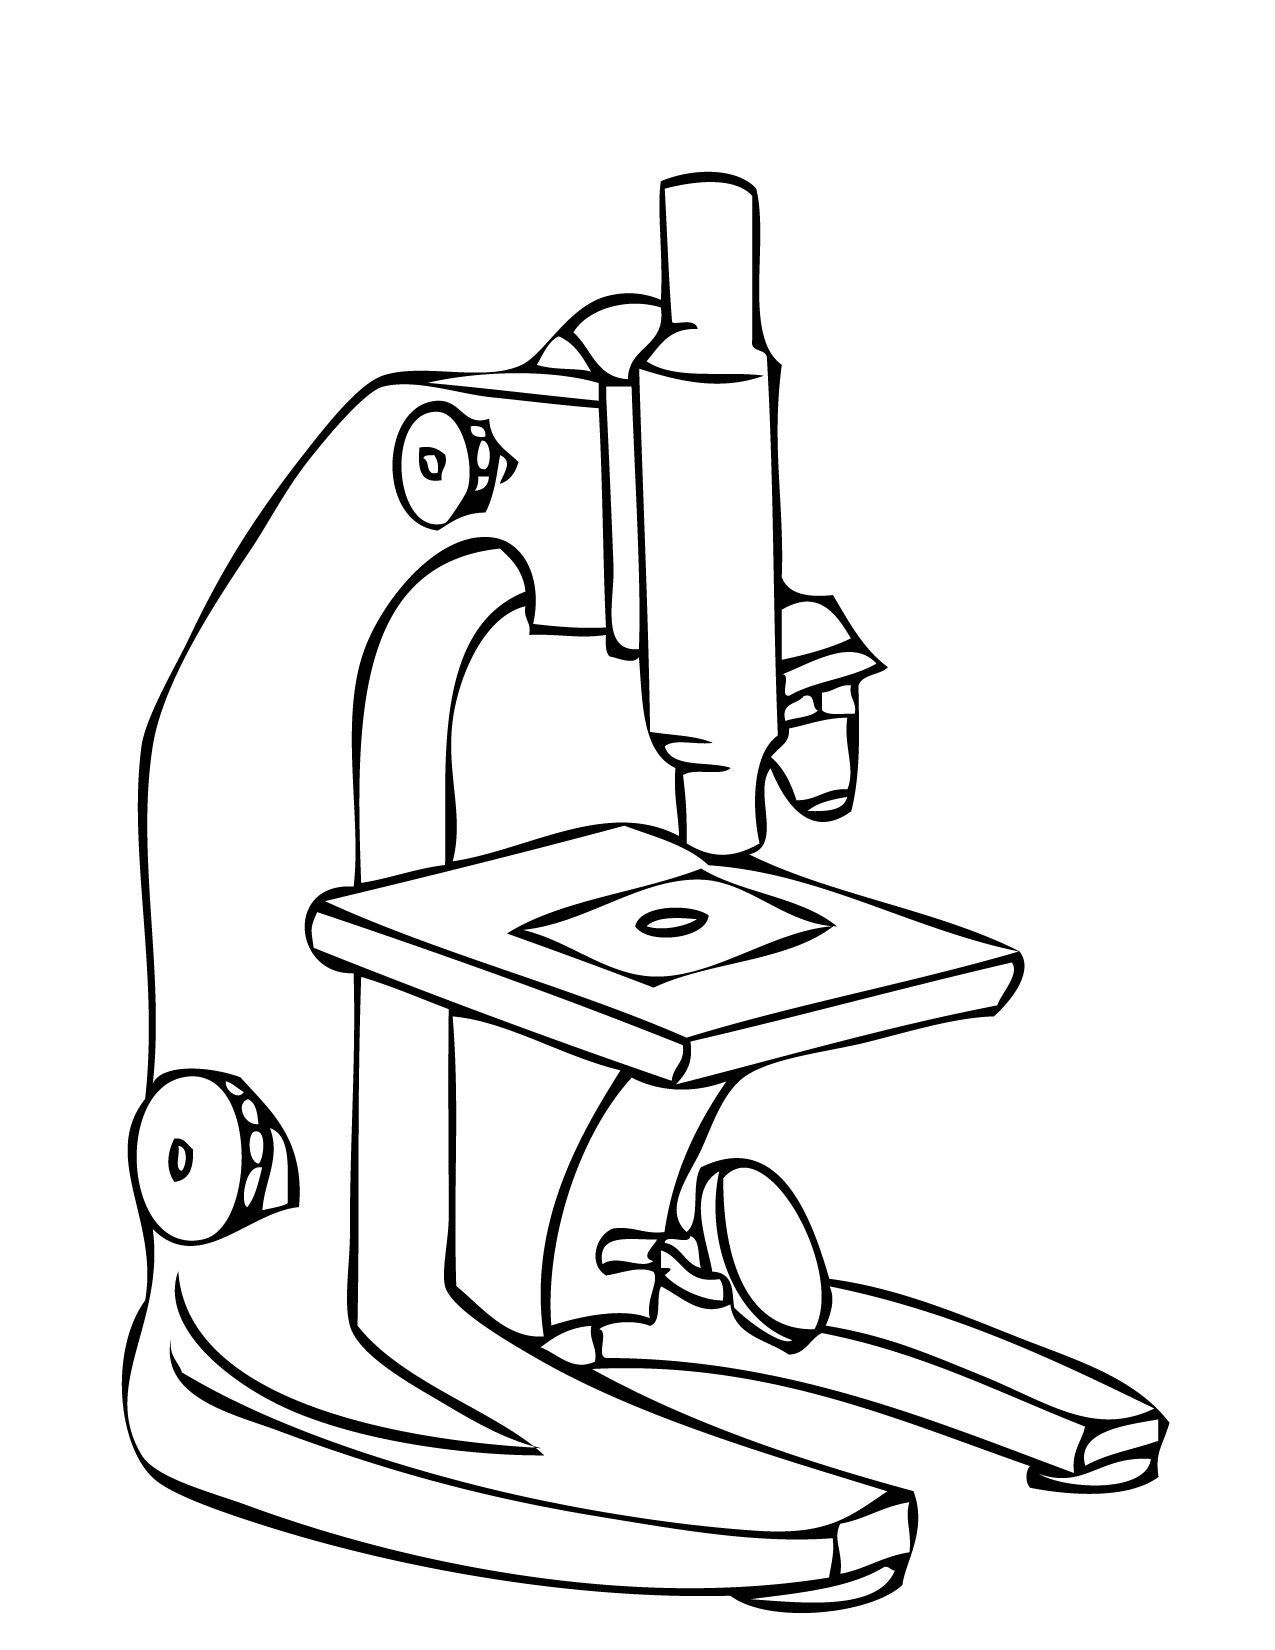 Simple Microscope Clipart Black And White | Clipart library - Free 